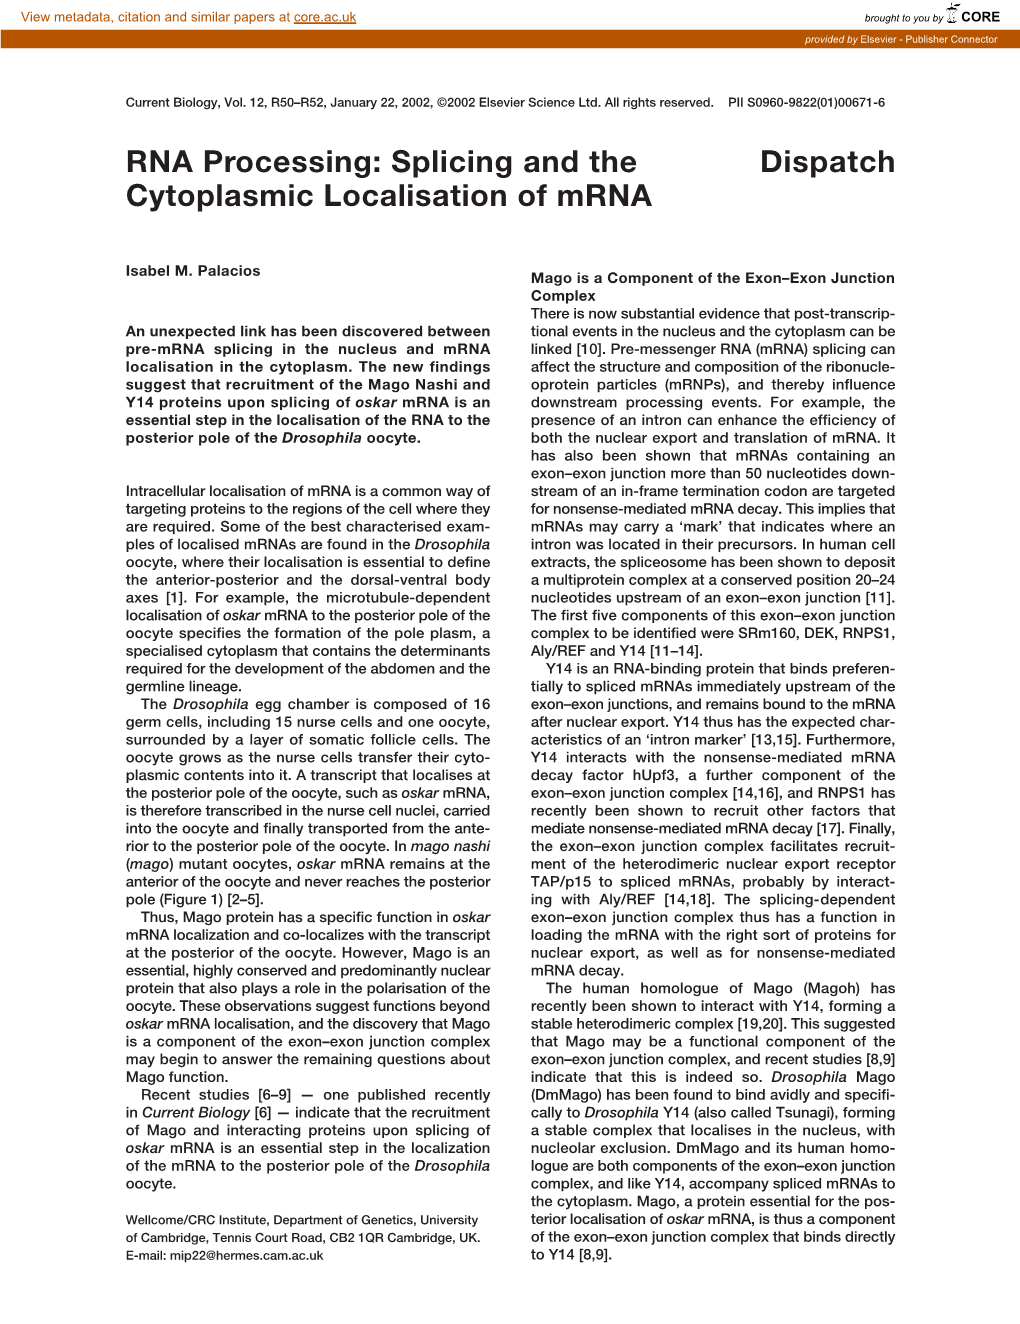 Splicing and the Cytoplasmic Localisation of Mrna Dispatch